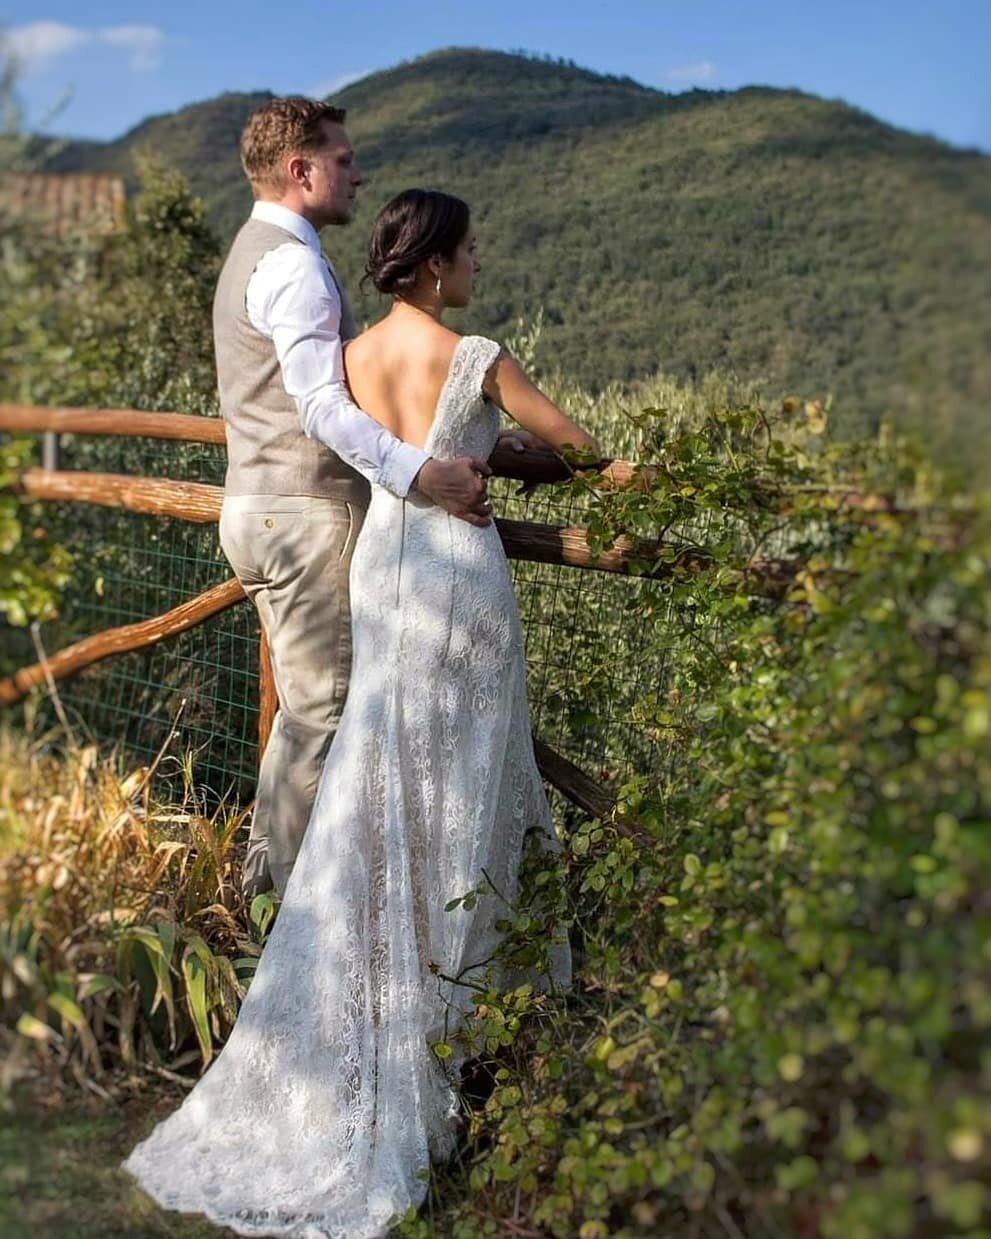 One of the first wedding gowns I ever had the pleasure to work on was for my sweet cousin Jessica!
🇮🇹 A Tuscany dream! 💍💕
.
.
.
.
.
✂Alterations📍 

💒👗
▪︎take in full side seams
▪︎shorten shoulder straps 
▪︎take in center back seam
▪︎shorten le